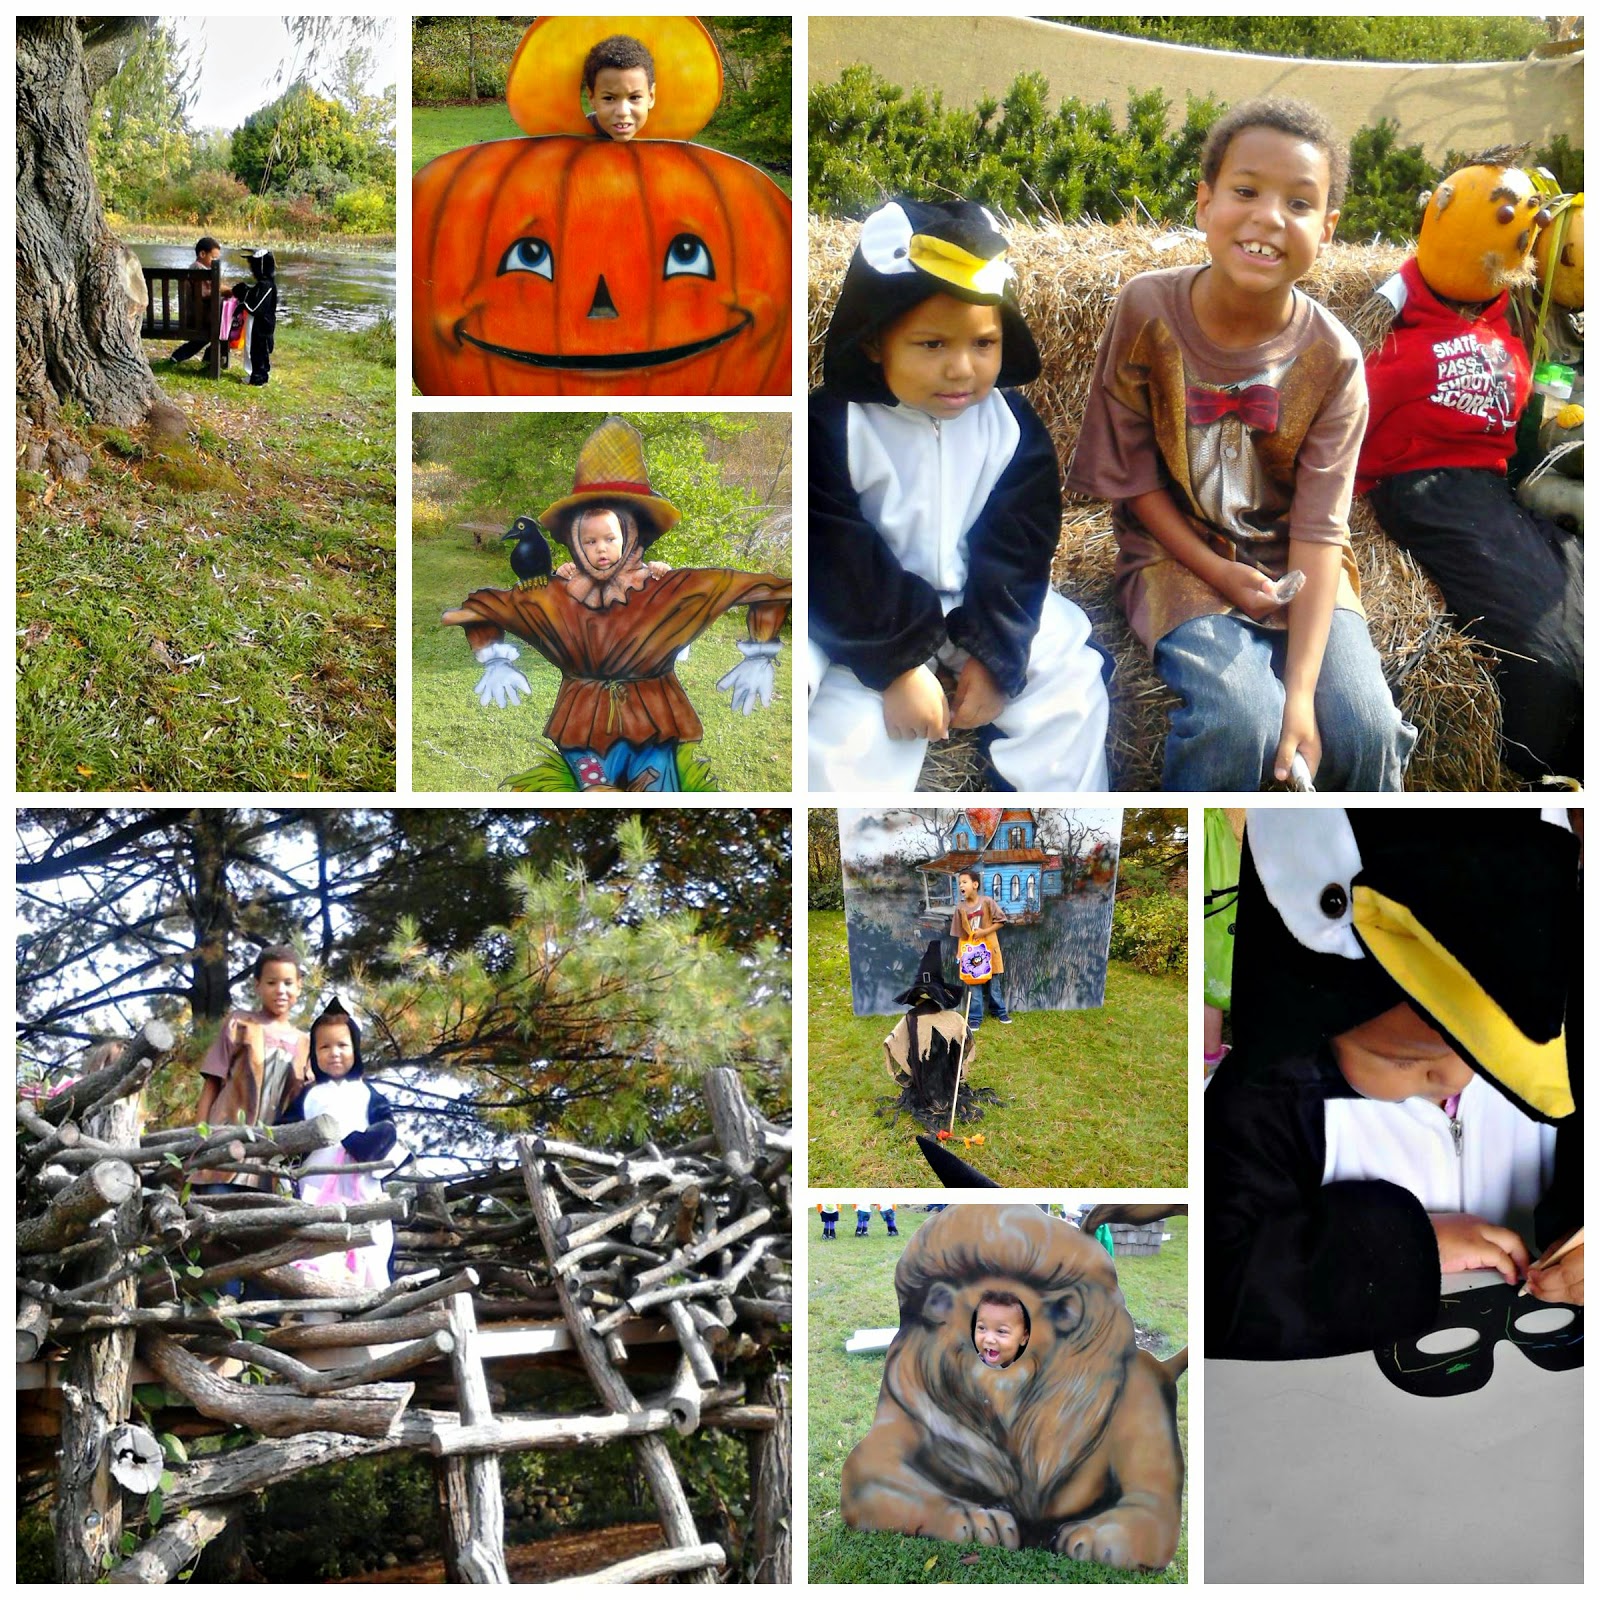 Fall fun in Northeast Ohio at Goblins in the Garden at the Holden Arboretum | iNeed a Playdate